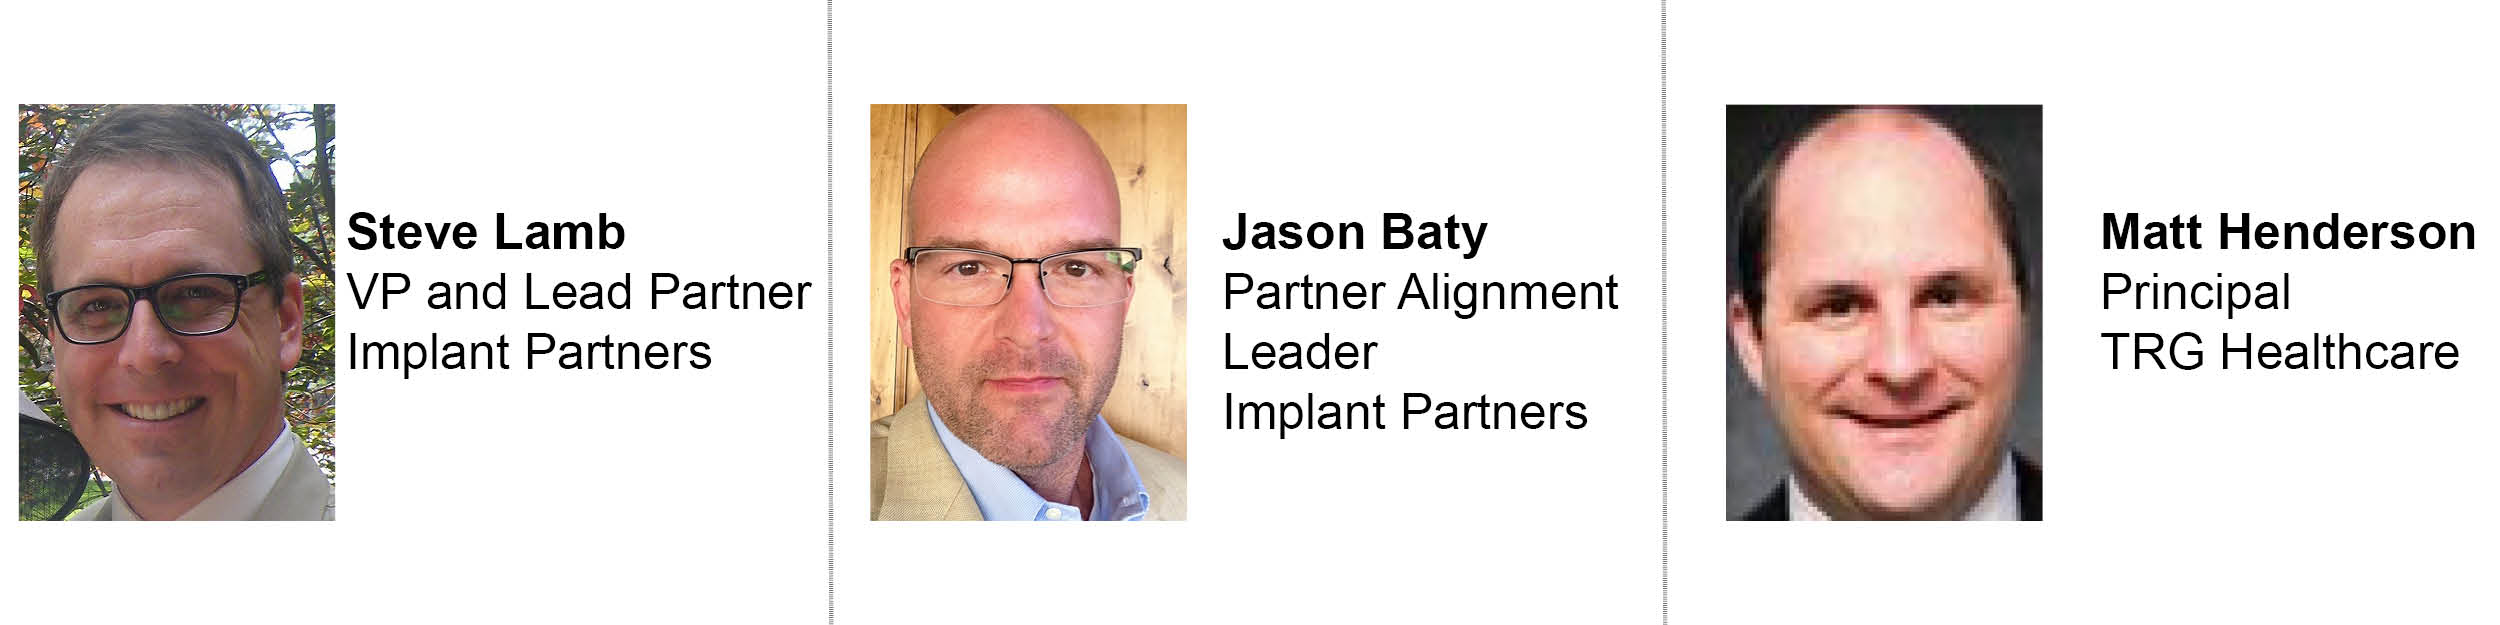 Implant Partners Focus Group